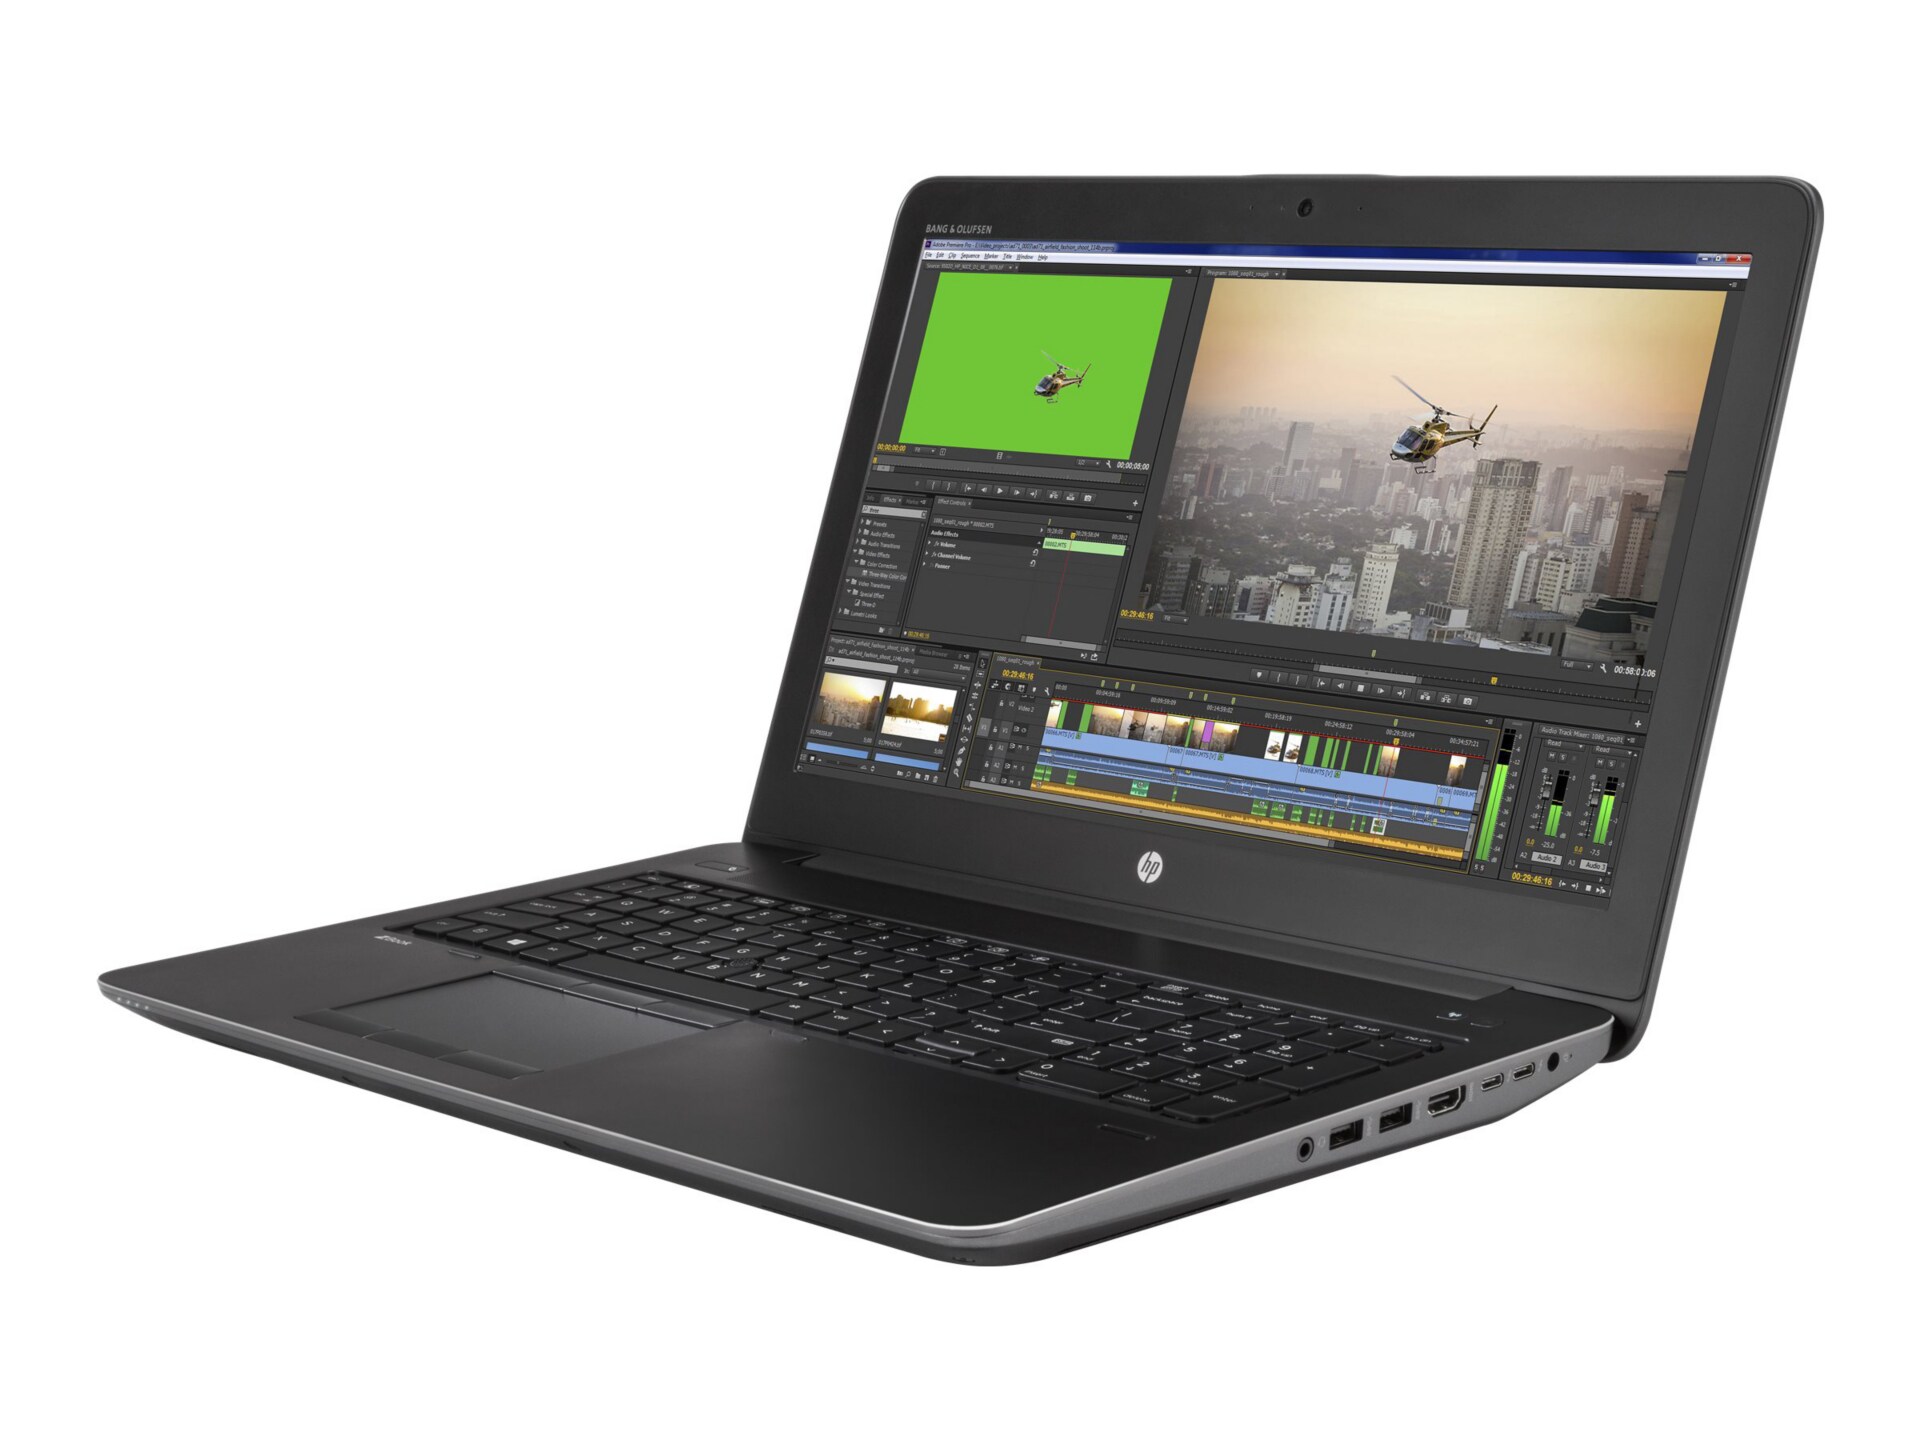 HP ZBook 15 G3 Mobile Workstation - 15.6" - Core i7 6820HQ - 32 GB RAM - 256 GB SSD + 1 TB HDD - US